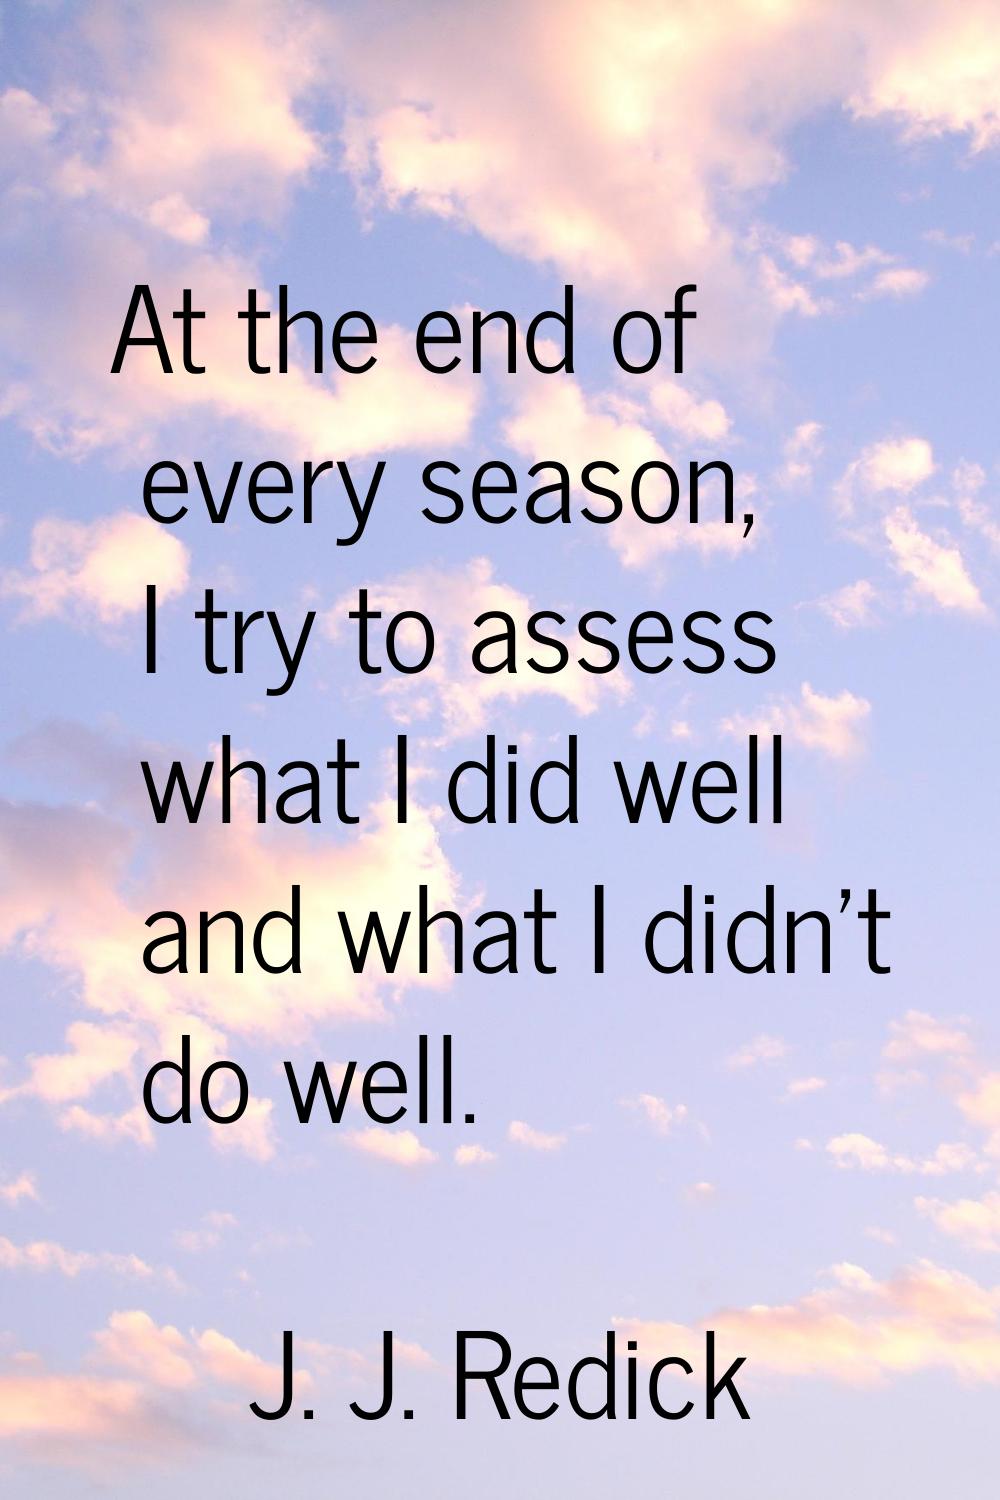 At the end of every season, I try to assess what I did well and what I didn't do well.